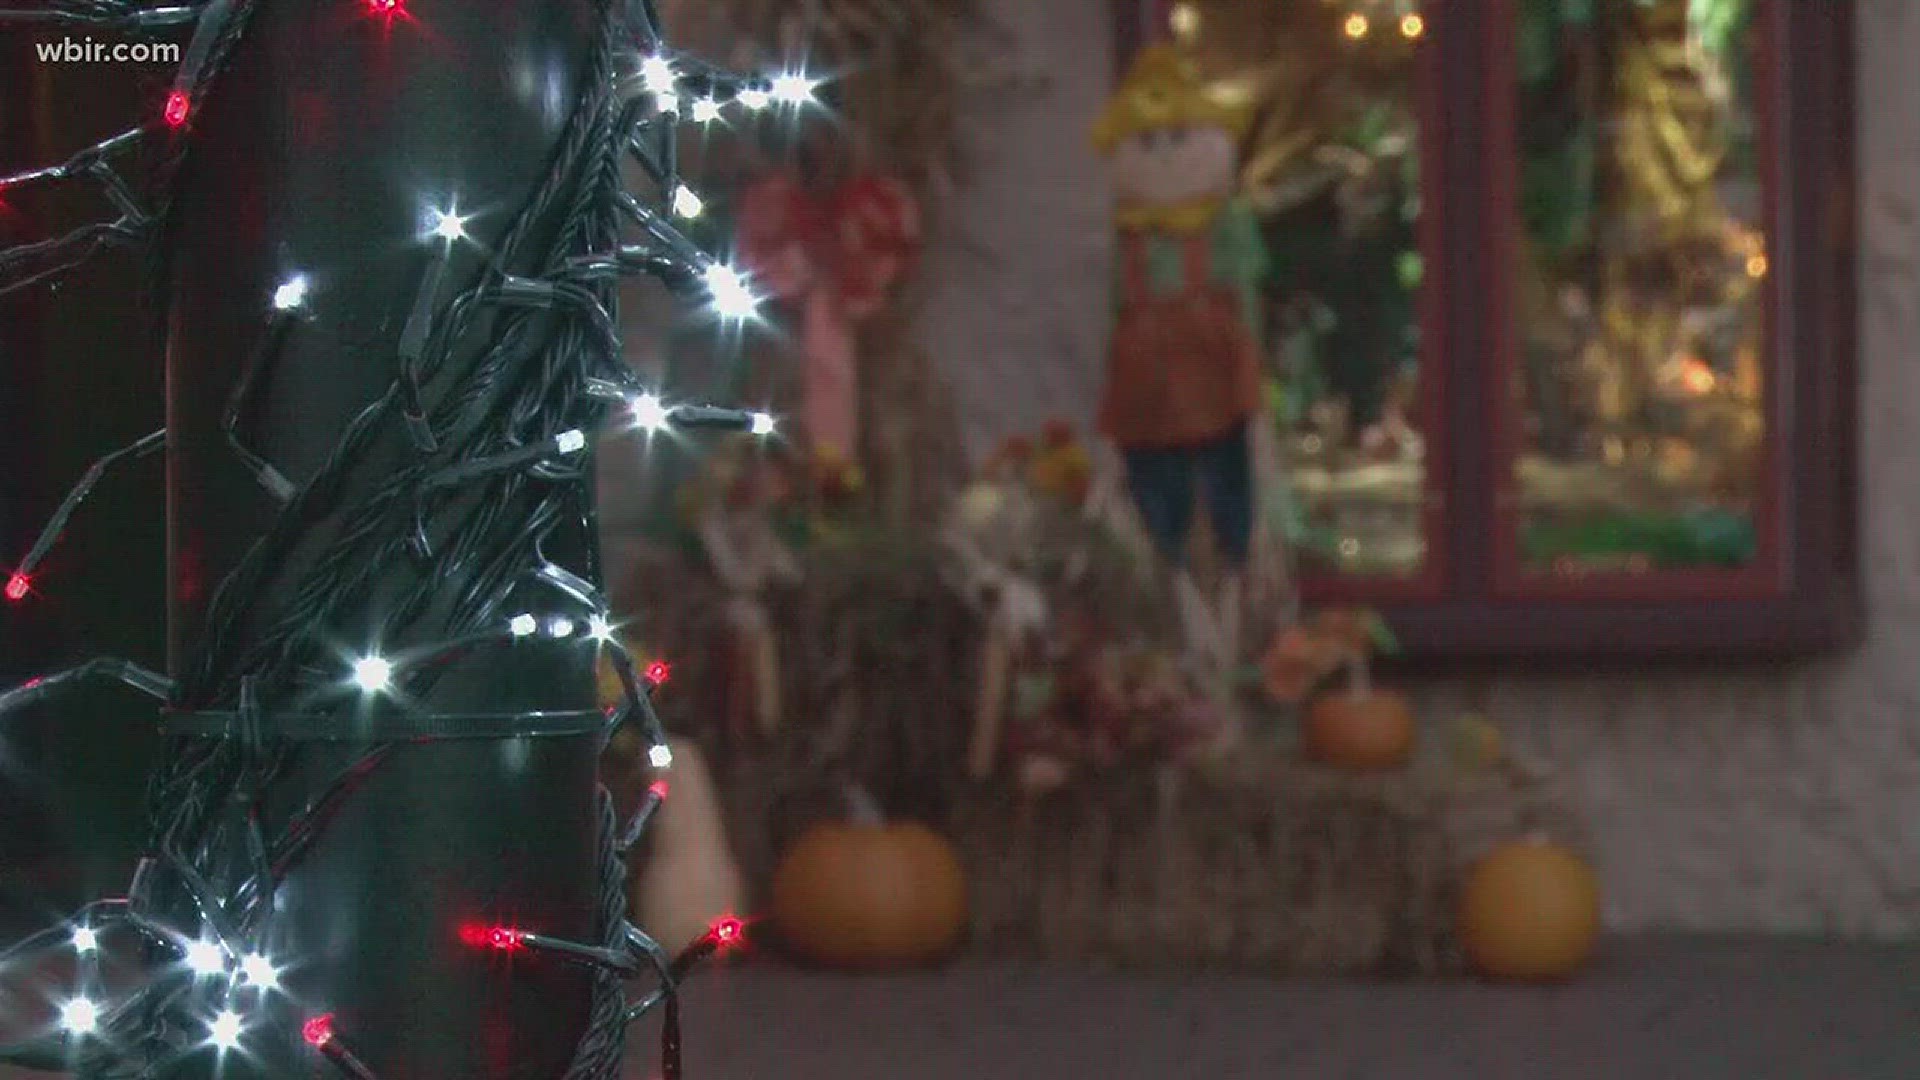 Oct. 31, 2017: Sevier County leaders are hopeful the annual Winterfest events will bring an economic boom following last year's wildfires.